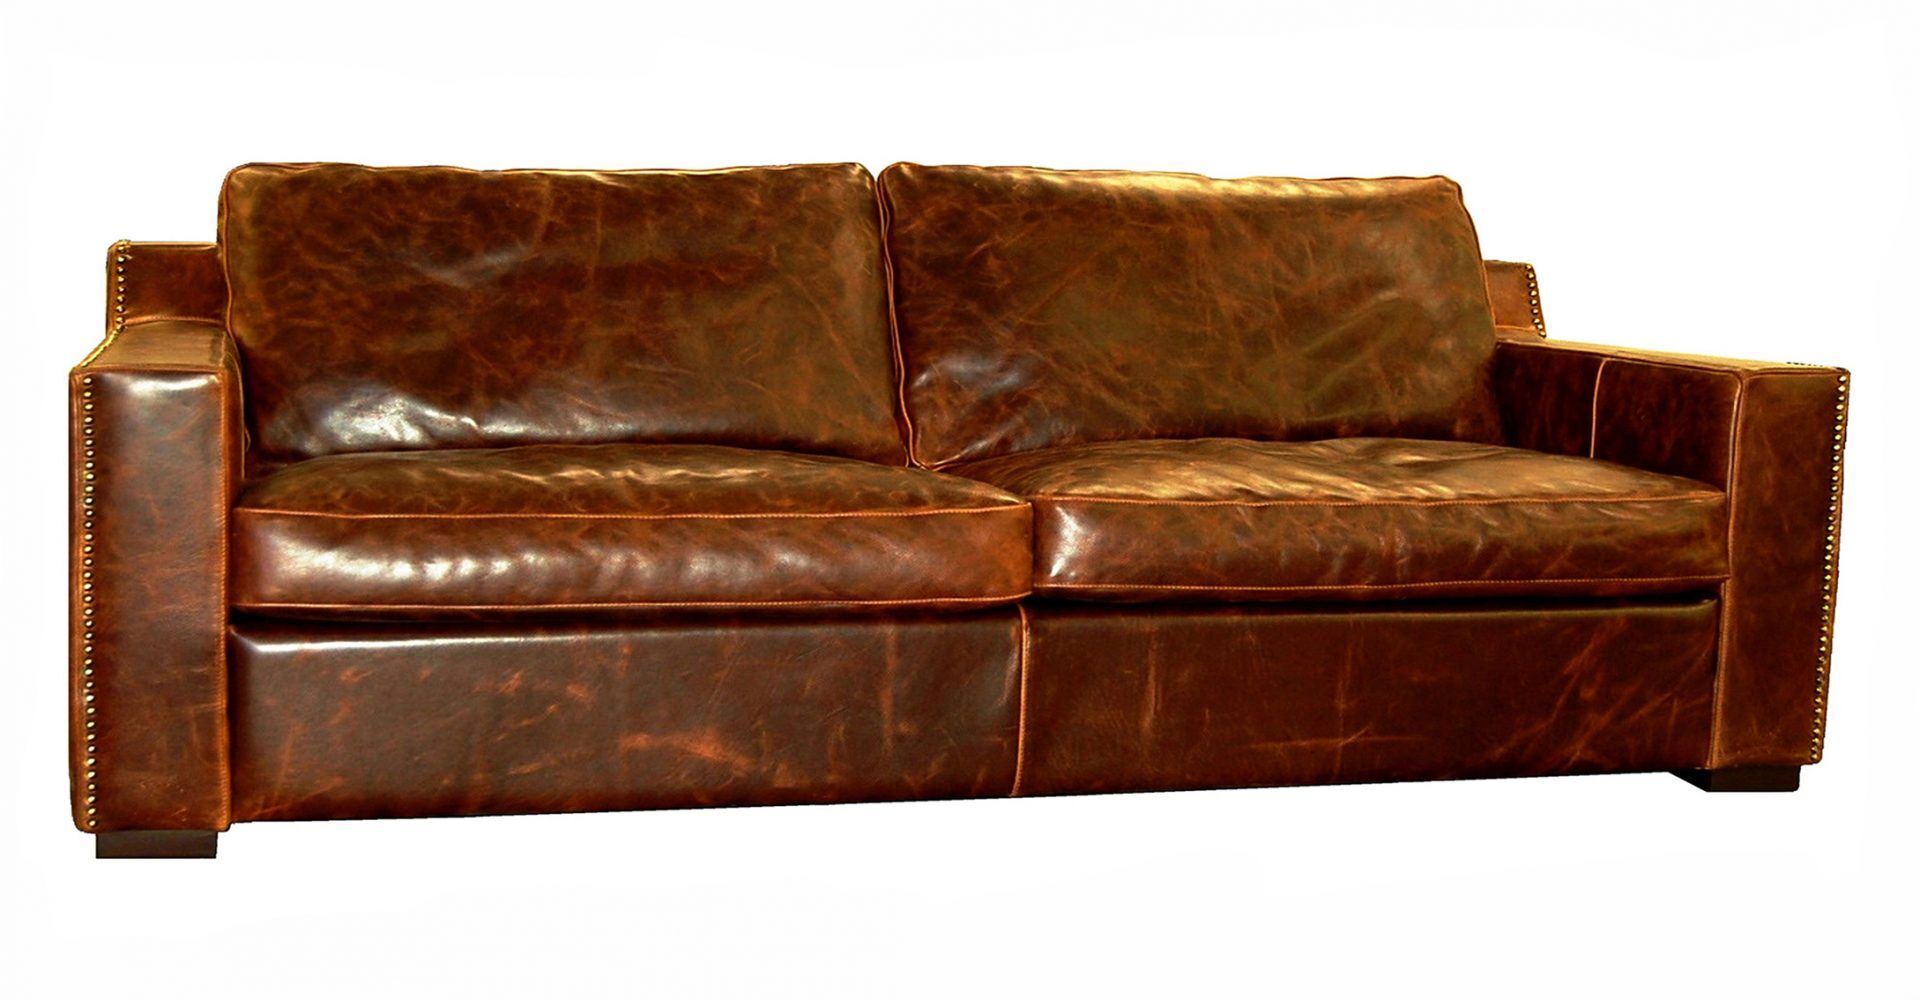 bedford sofa sleeper review american leather